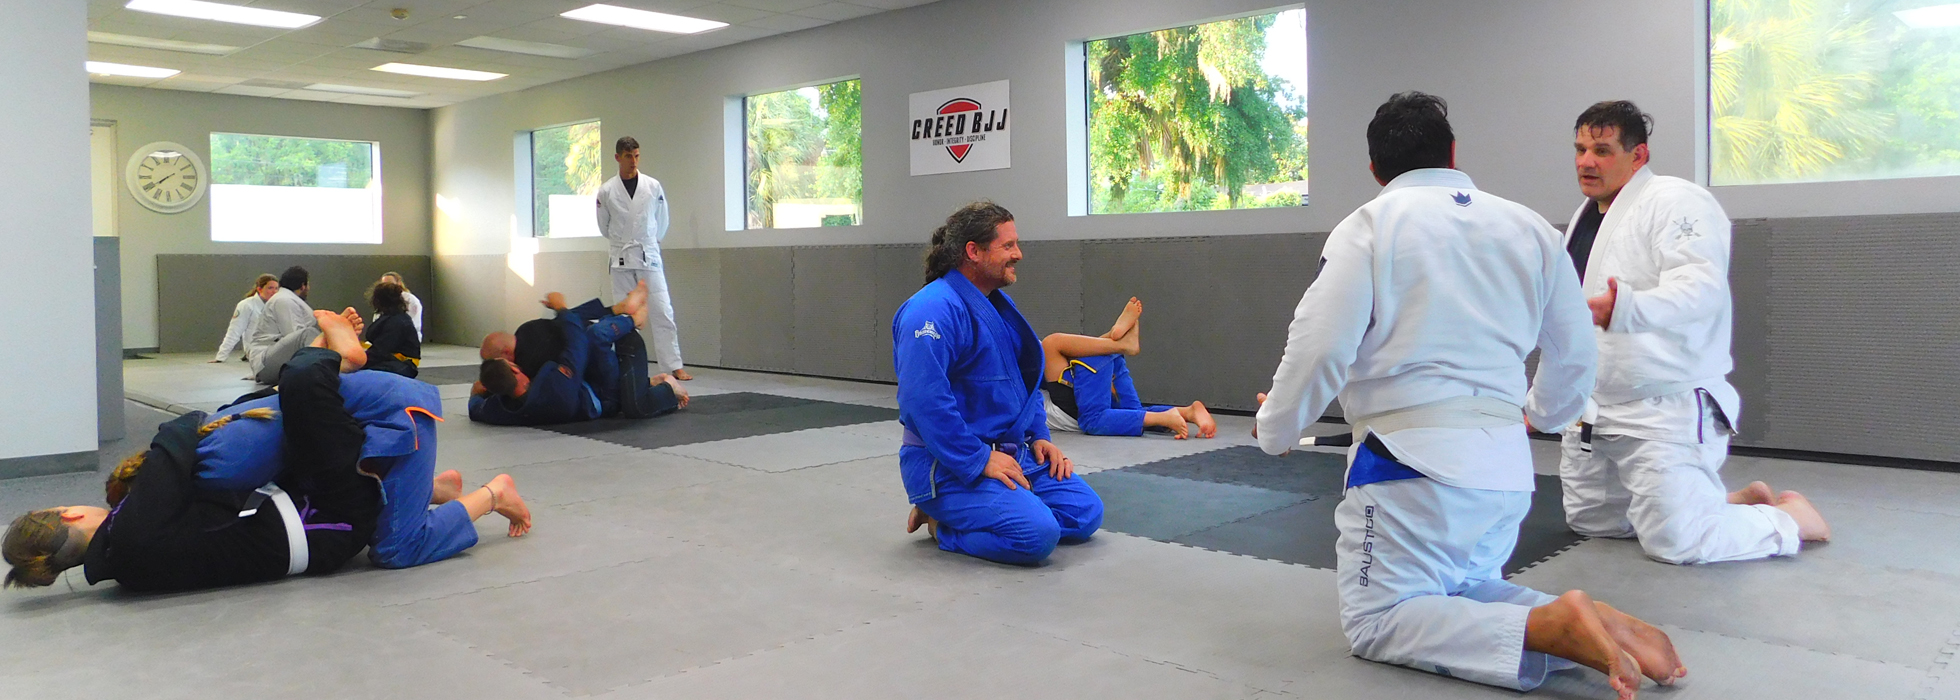 Why Creed BJJ Is Ranked One Of The Best Gyms in Ocala, FL close to SR 200, State Road 200, 200, College Road, SW Ocala and Marion County